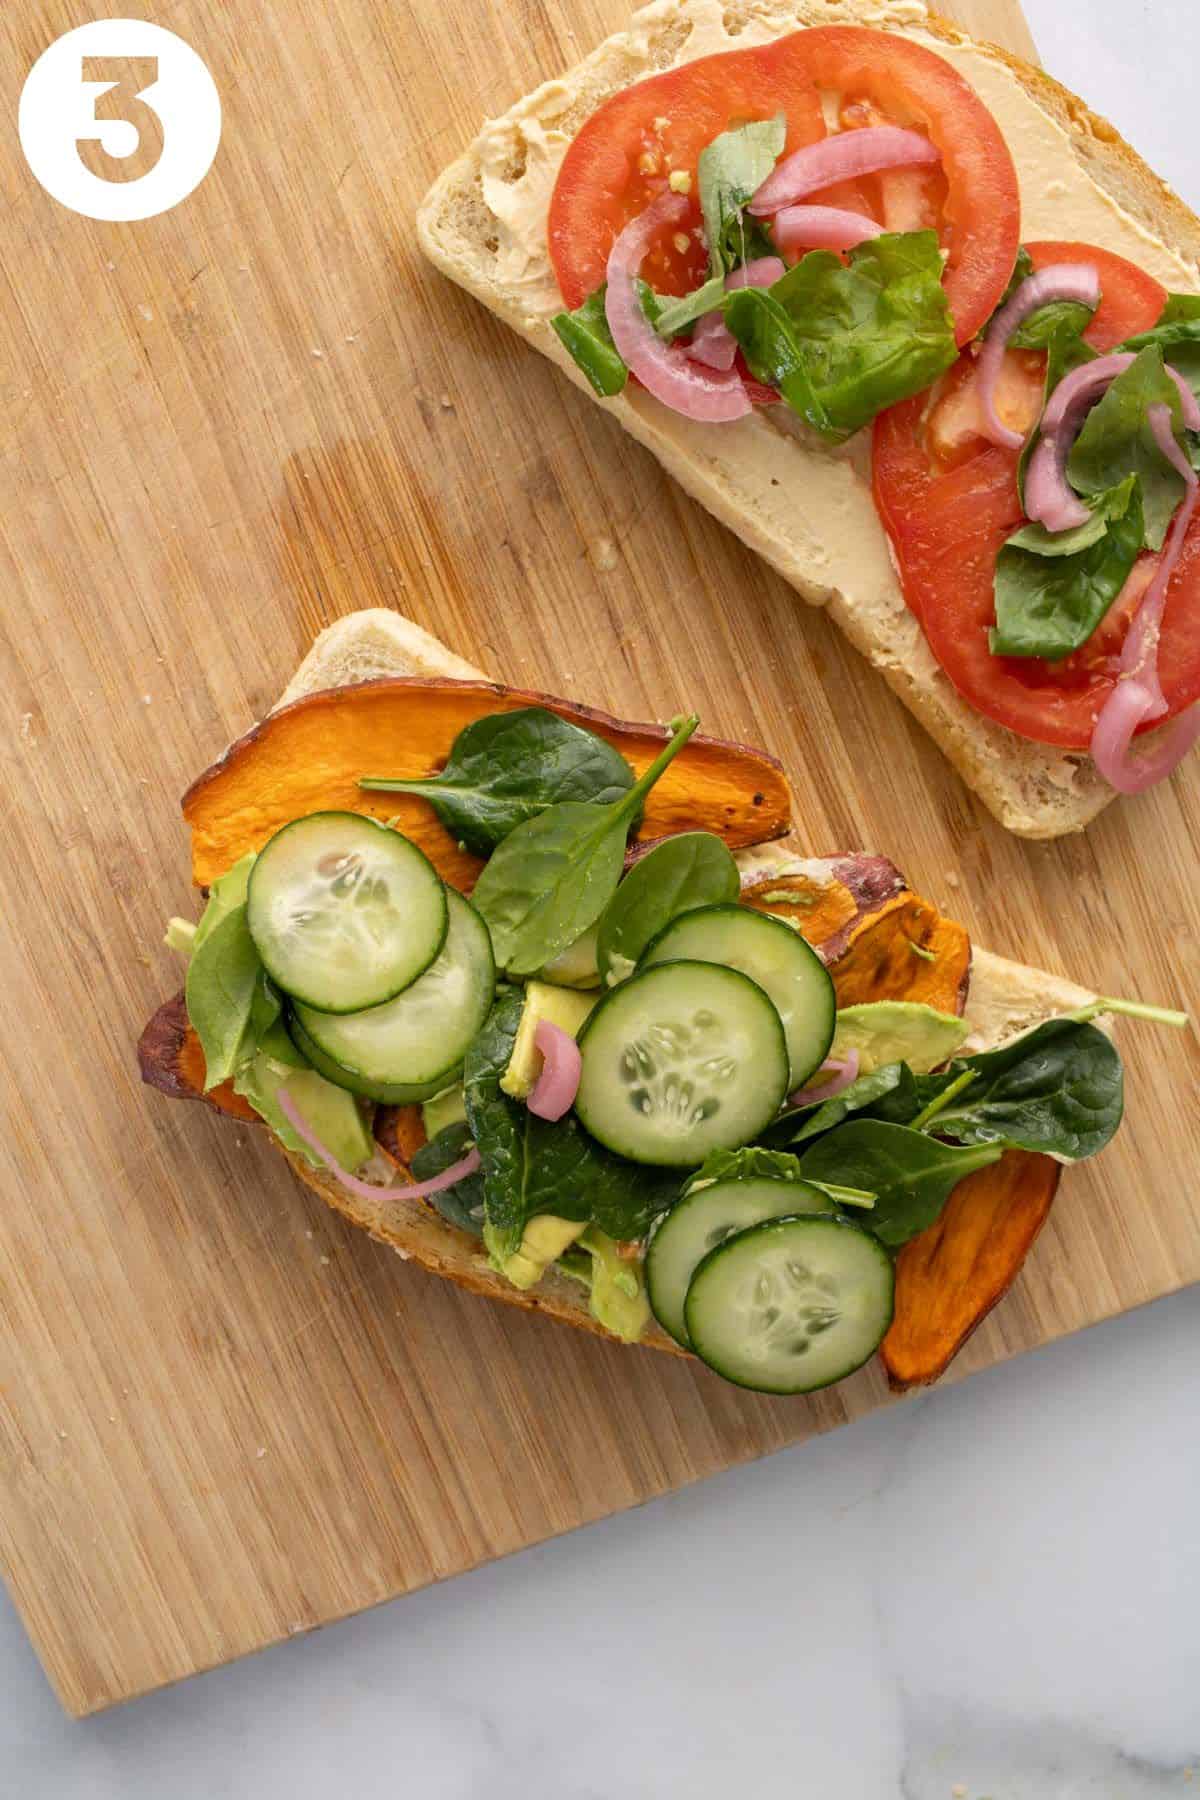 Veggie hummus sandwich with sweet potato, avocado, and cucumber open-faced on a wood cutting board. Labeled 